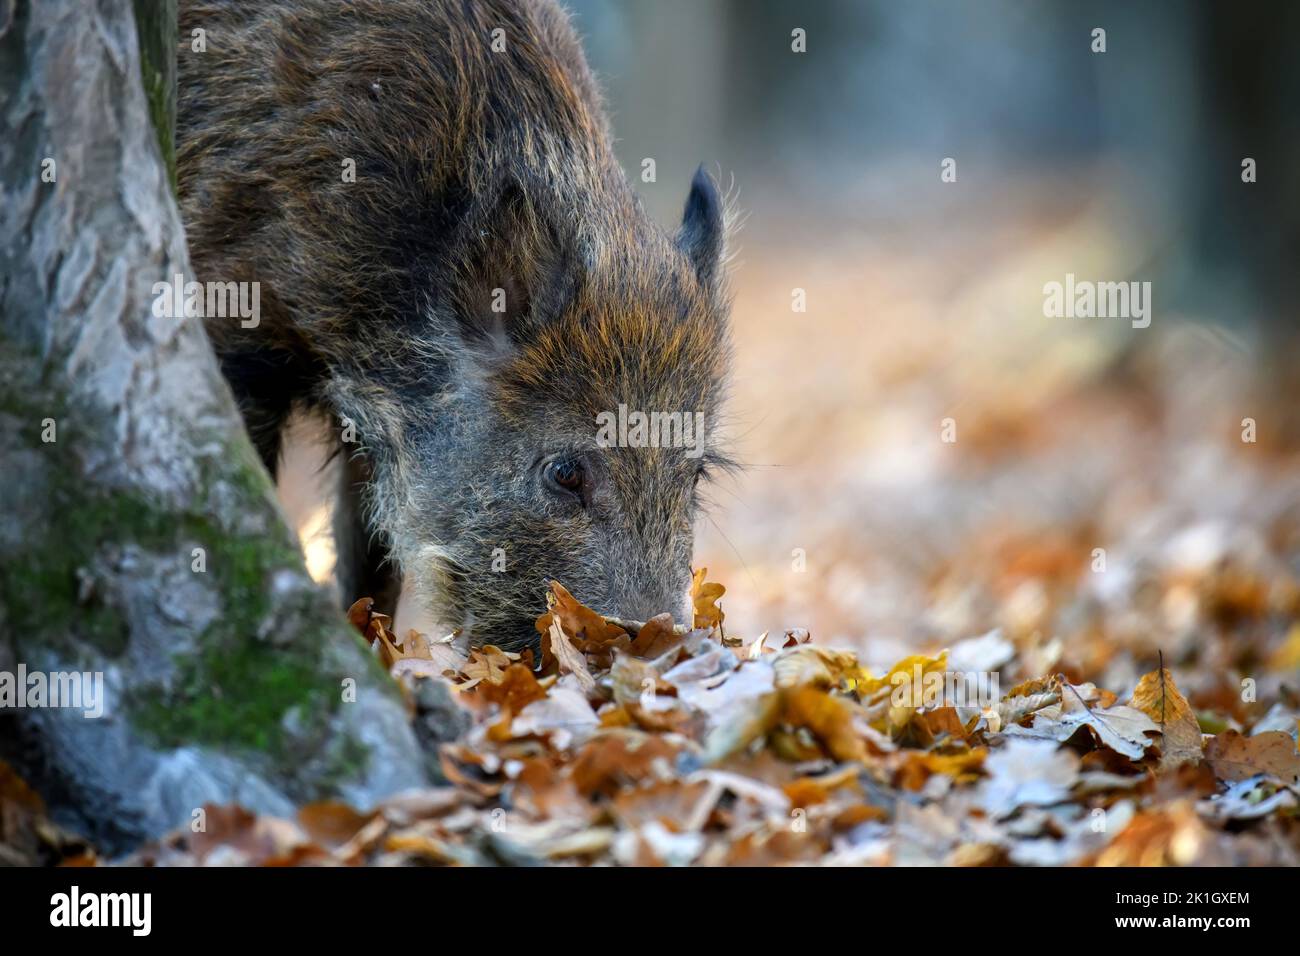 Male boar in an autumn forest looks for acorns in a fallen leaf. Wildlife scene from nature Stock Photo